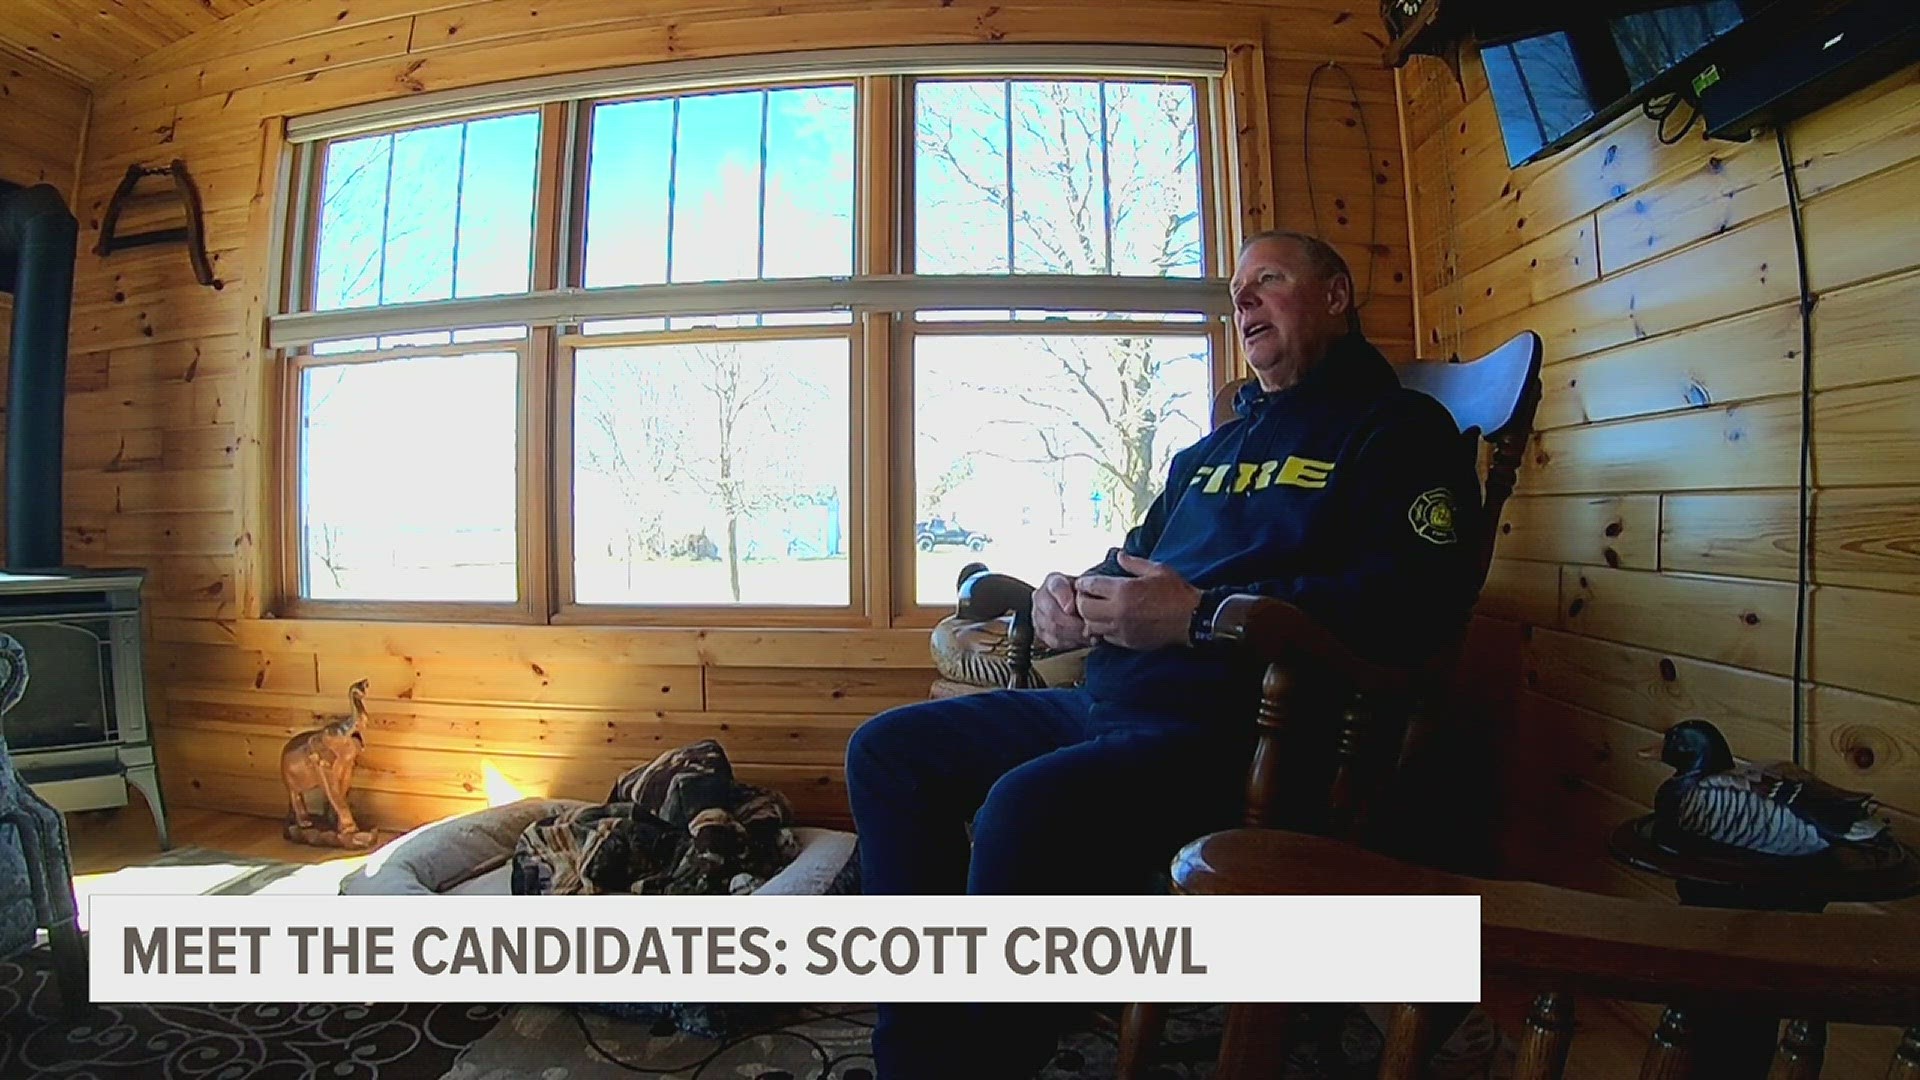 Scott Crowl is a Milan farmer and former union president running as a Republican in the Illinois primary.